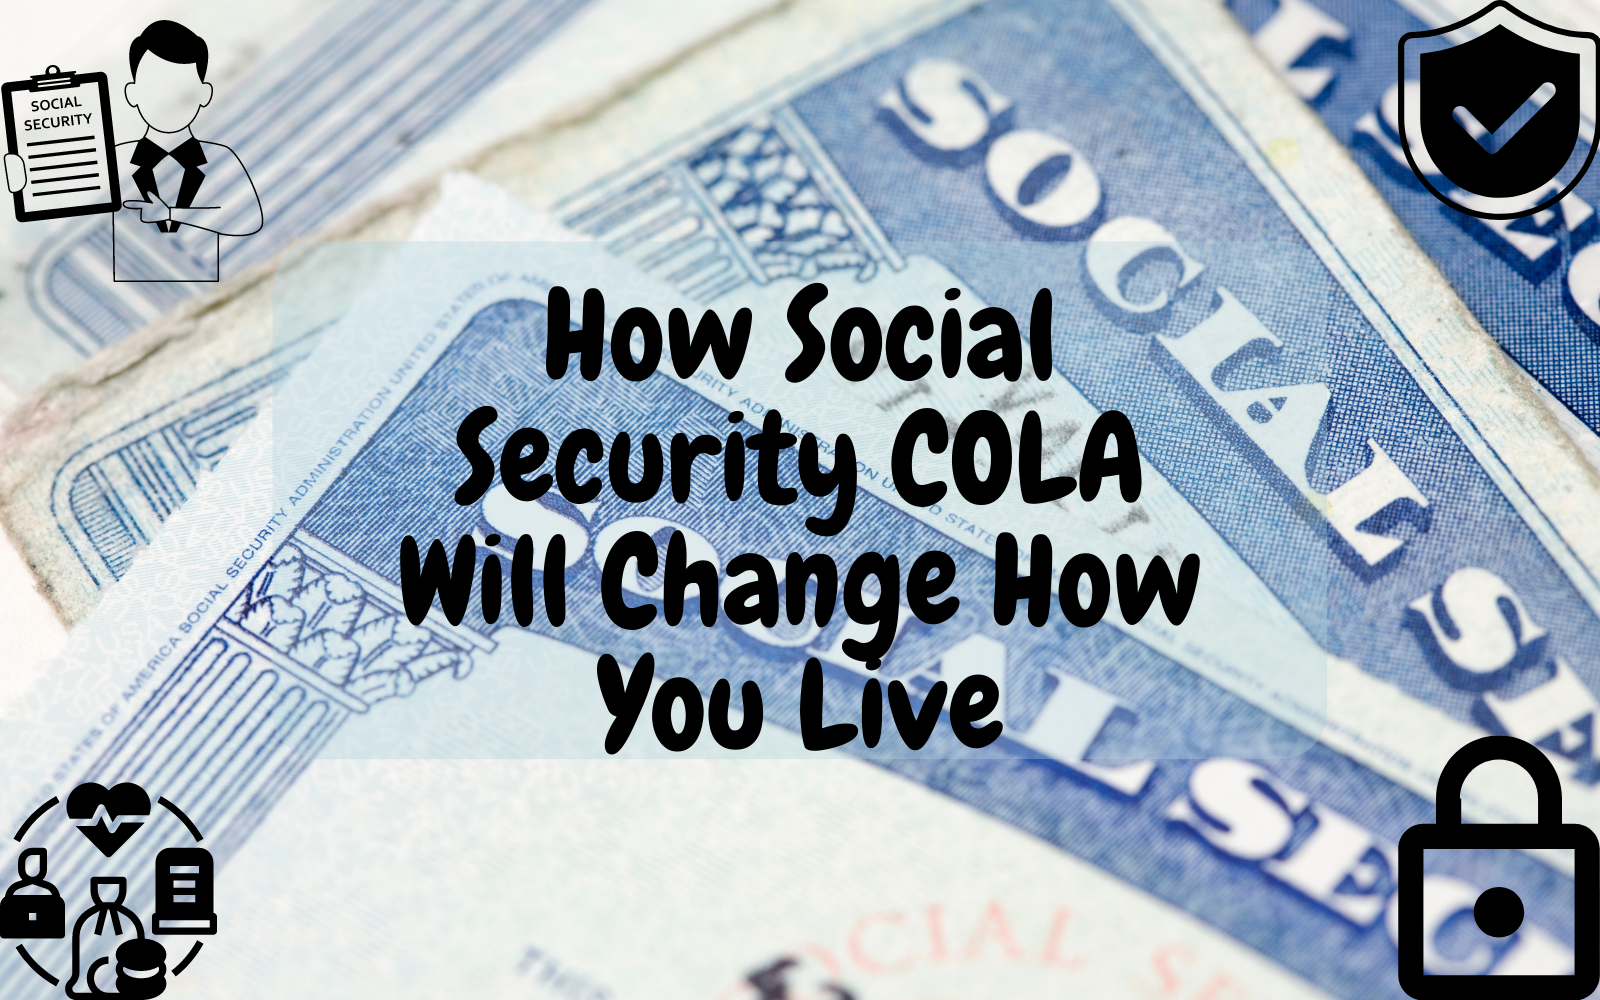 How Social Security COLA Will Change How You Live